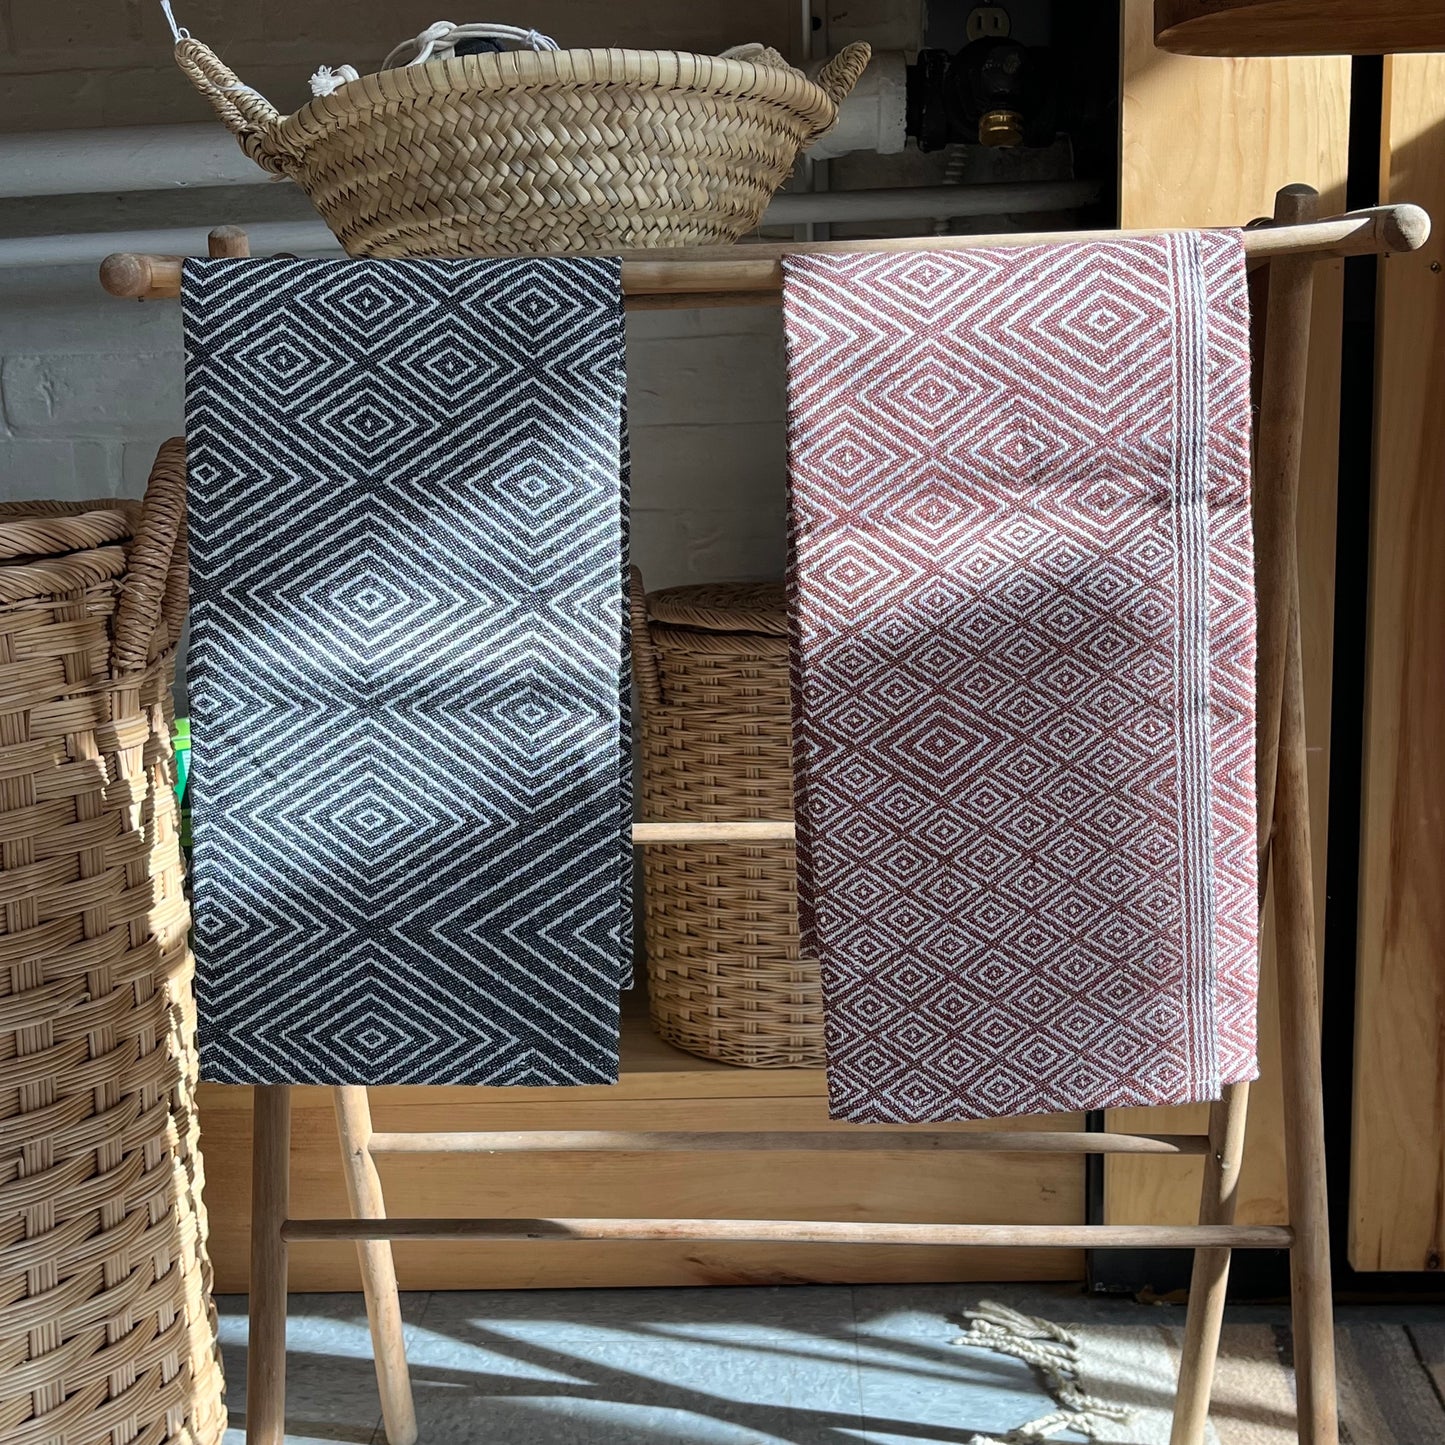 Two linen tea towels in classic diamond pattern hanging on wooden rack